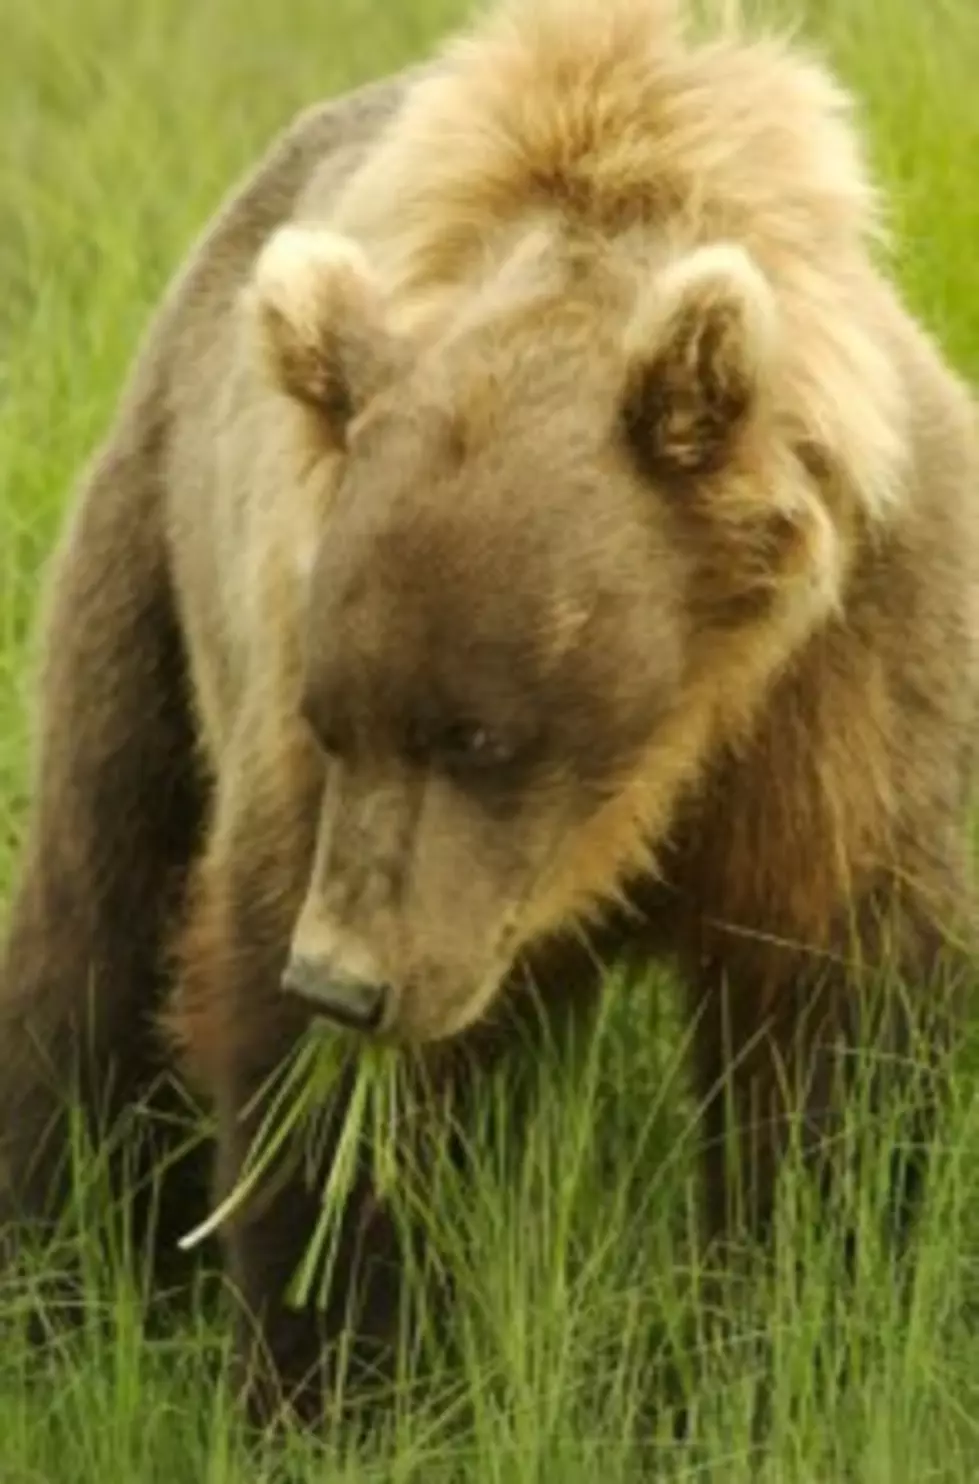 Ohio Zoo to Take Cubs of Bear that Killed Yellowstone Hiker